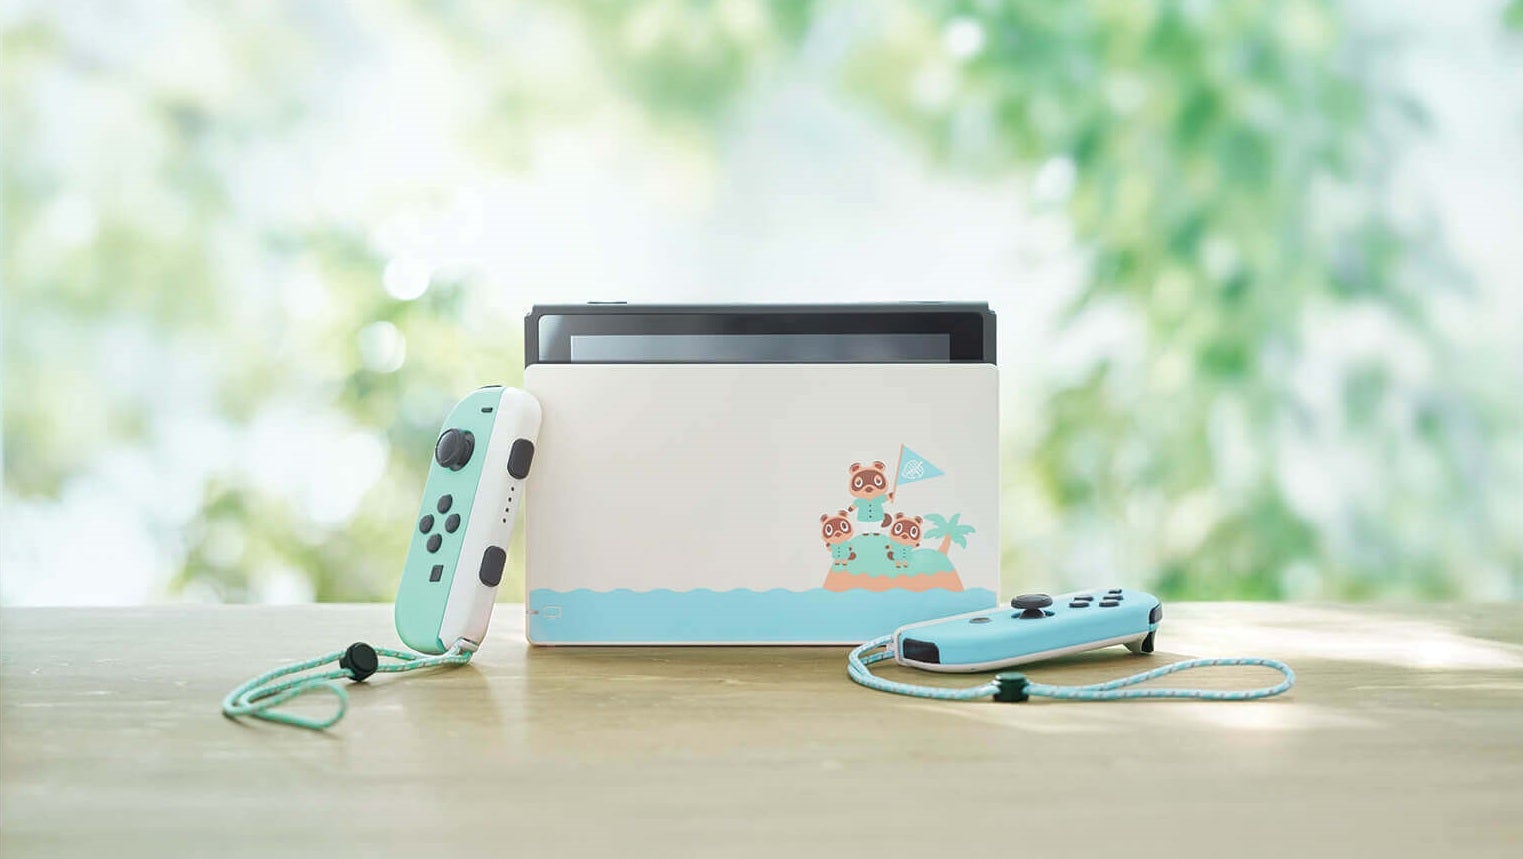 Image for The Limited Edition Animal Crossing Nintendo Switch is back for preorders